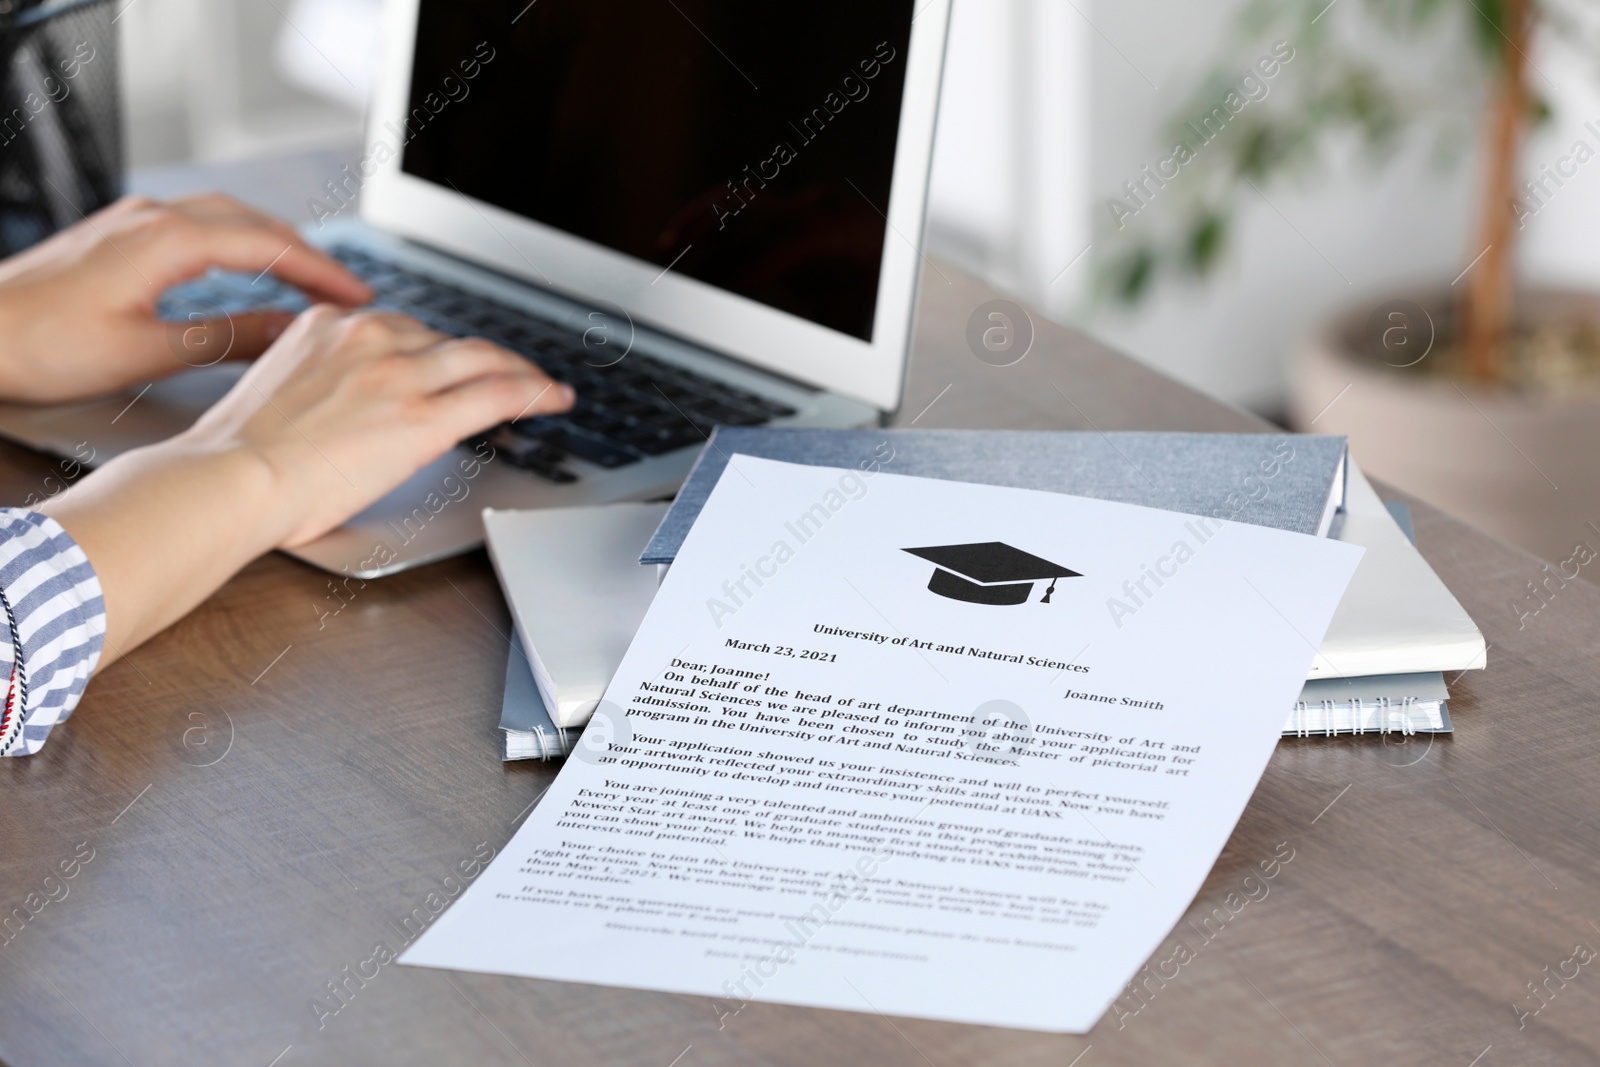 Photo of Student working with laptop at table indoors, focus on acceptance letter from university